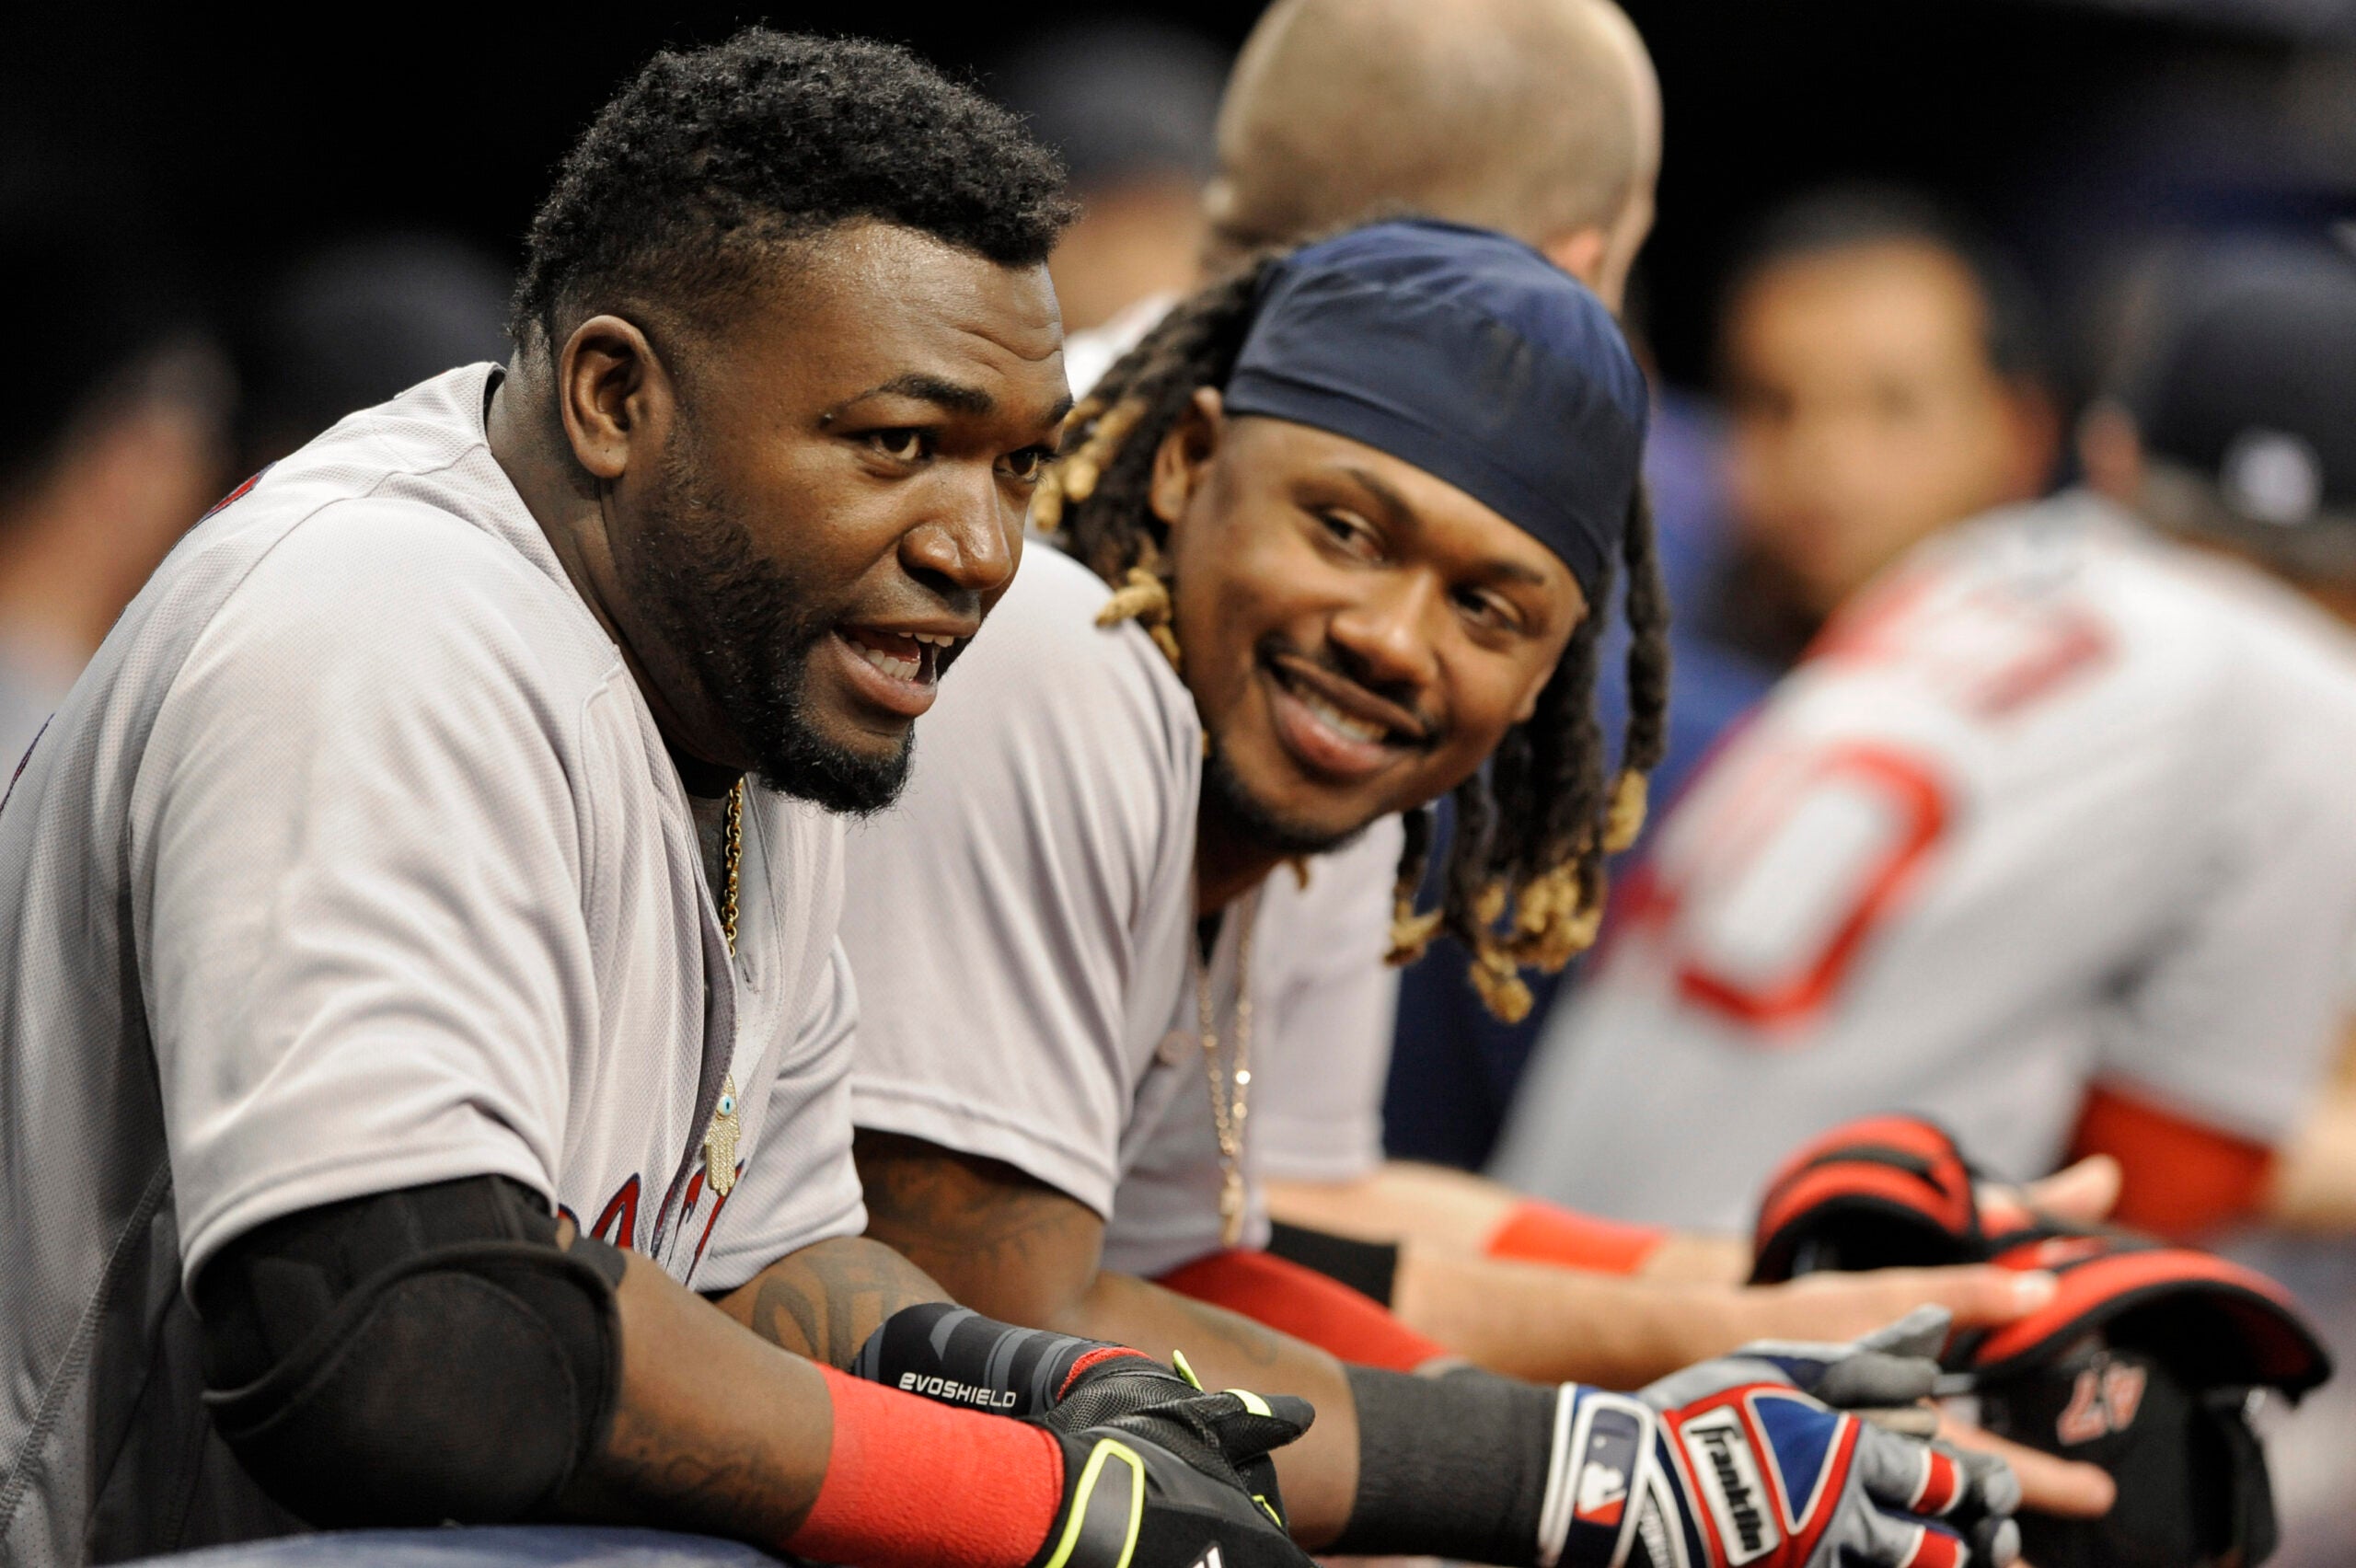 Big Papi famous quote T-shirts on sale. Hey, it's for a good F'n cause